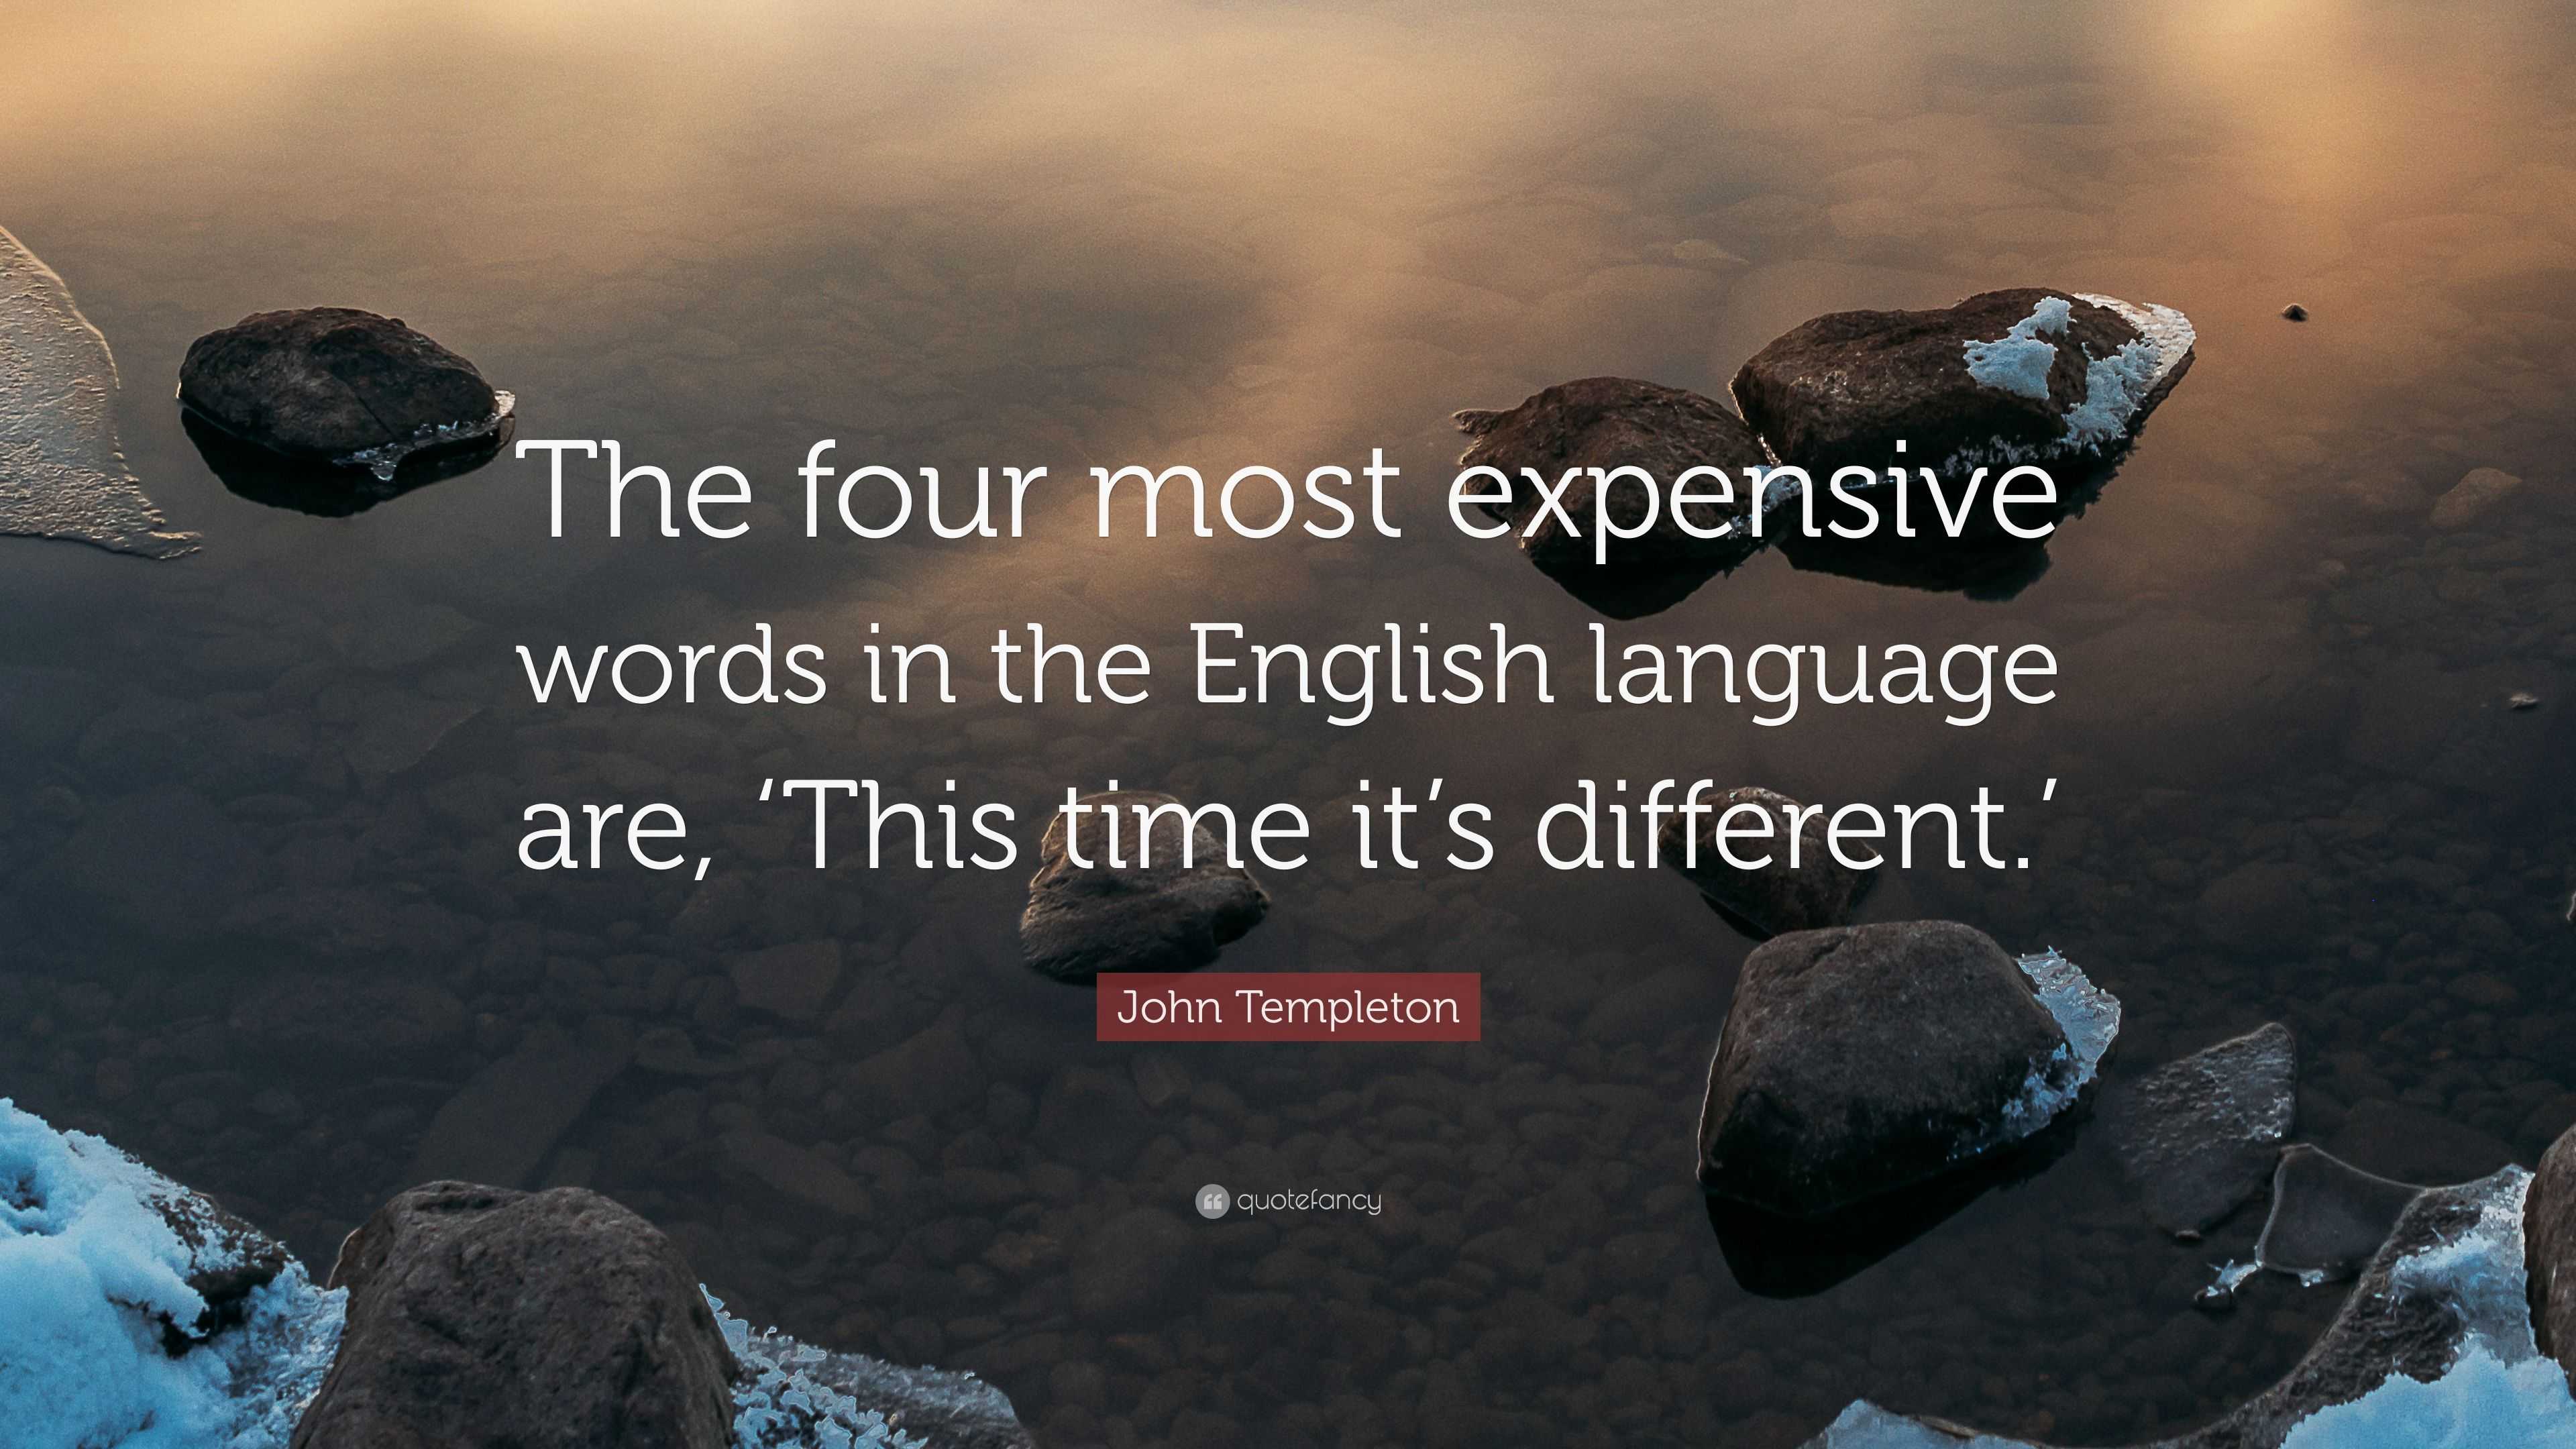 2184400-John-Templeton-Quote-The-four-most-expensive-words-in-the-English.jpg